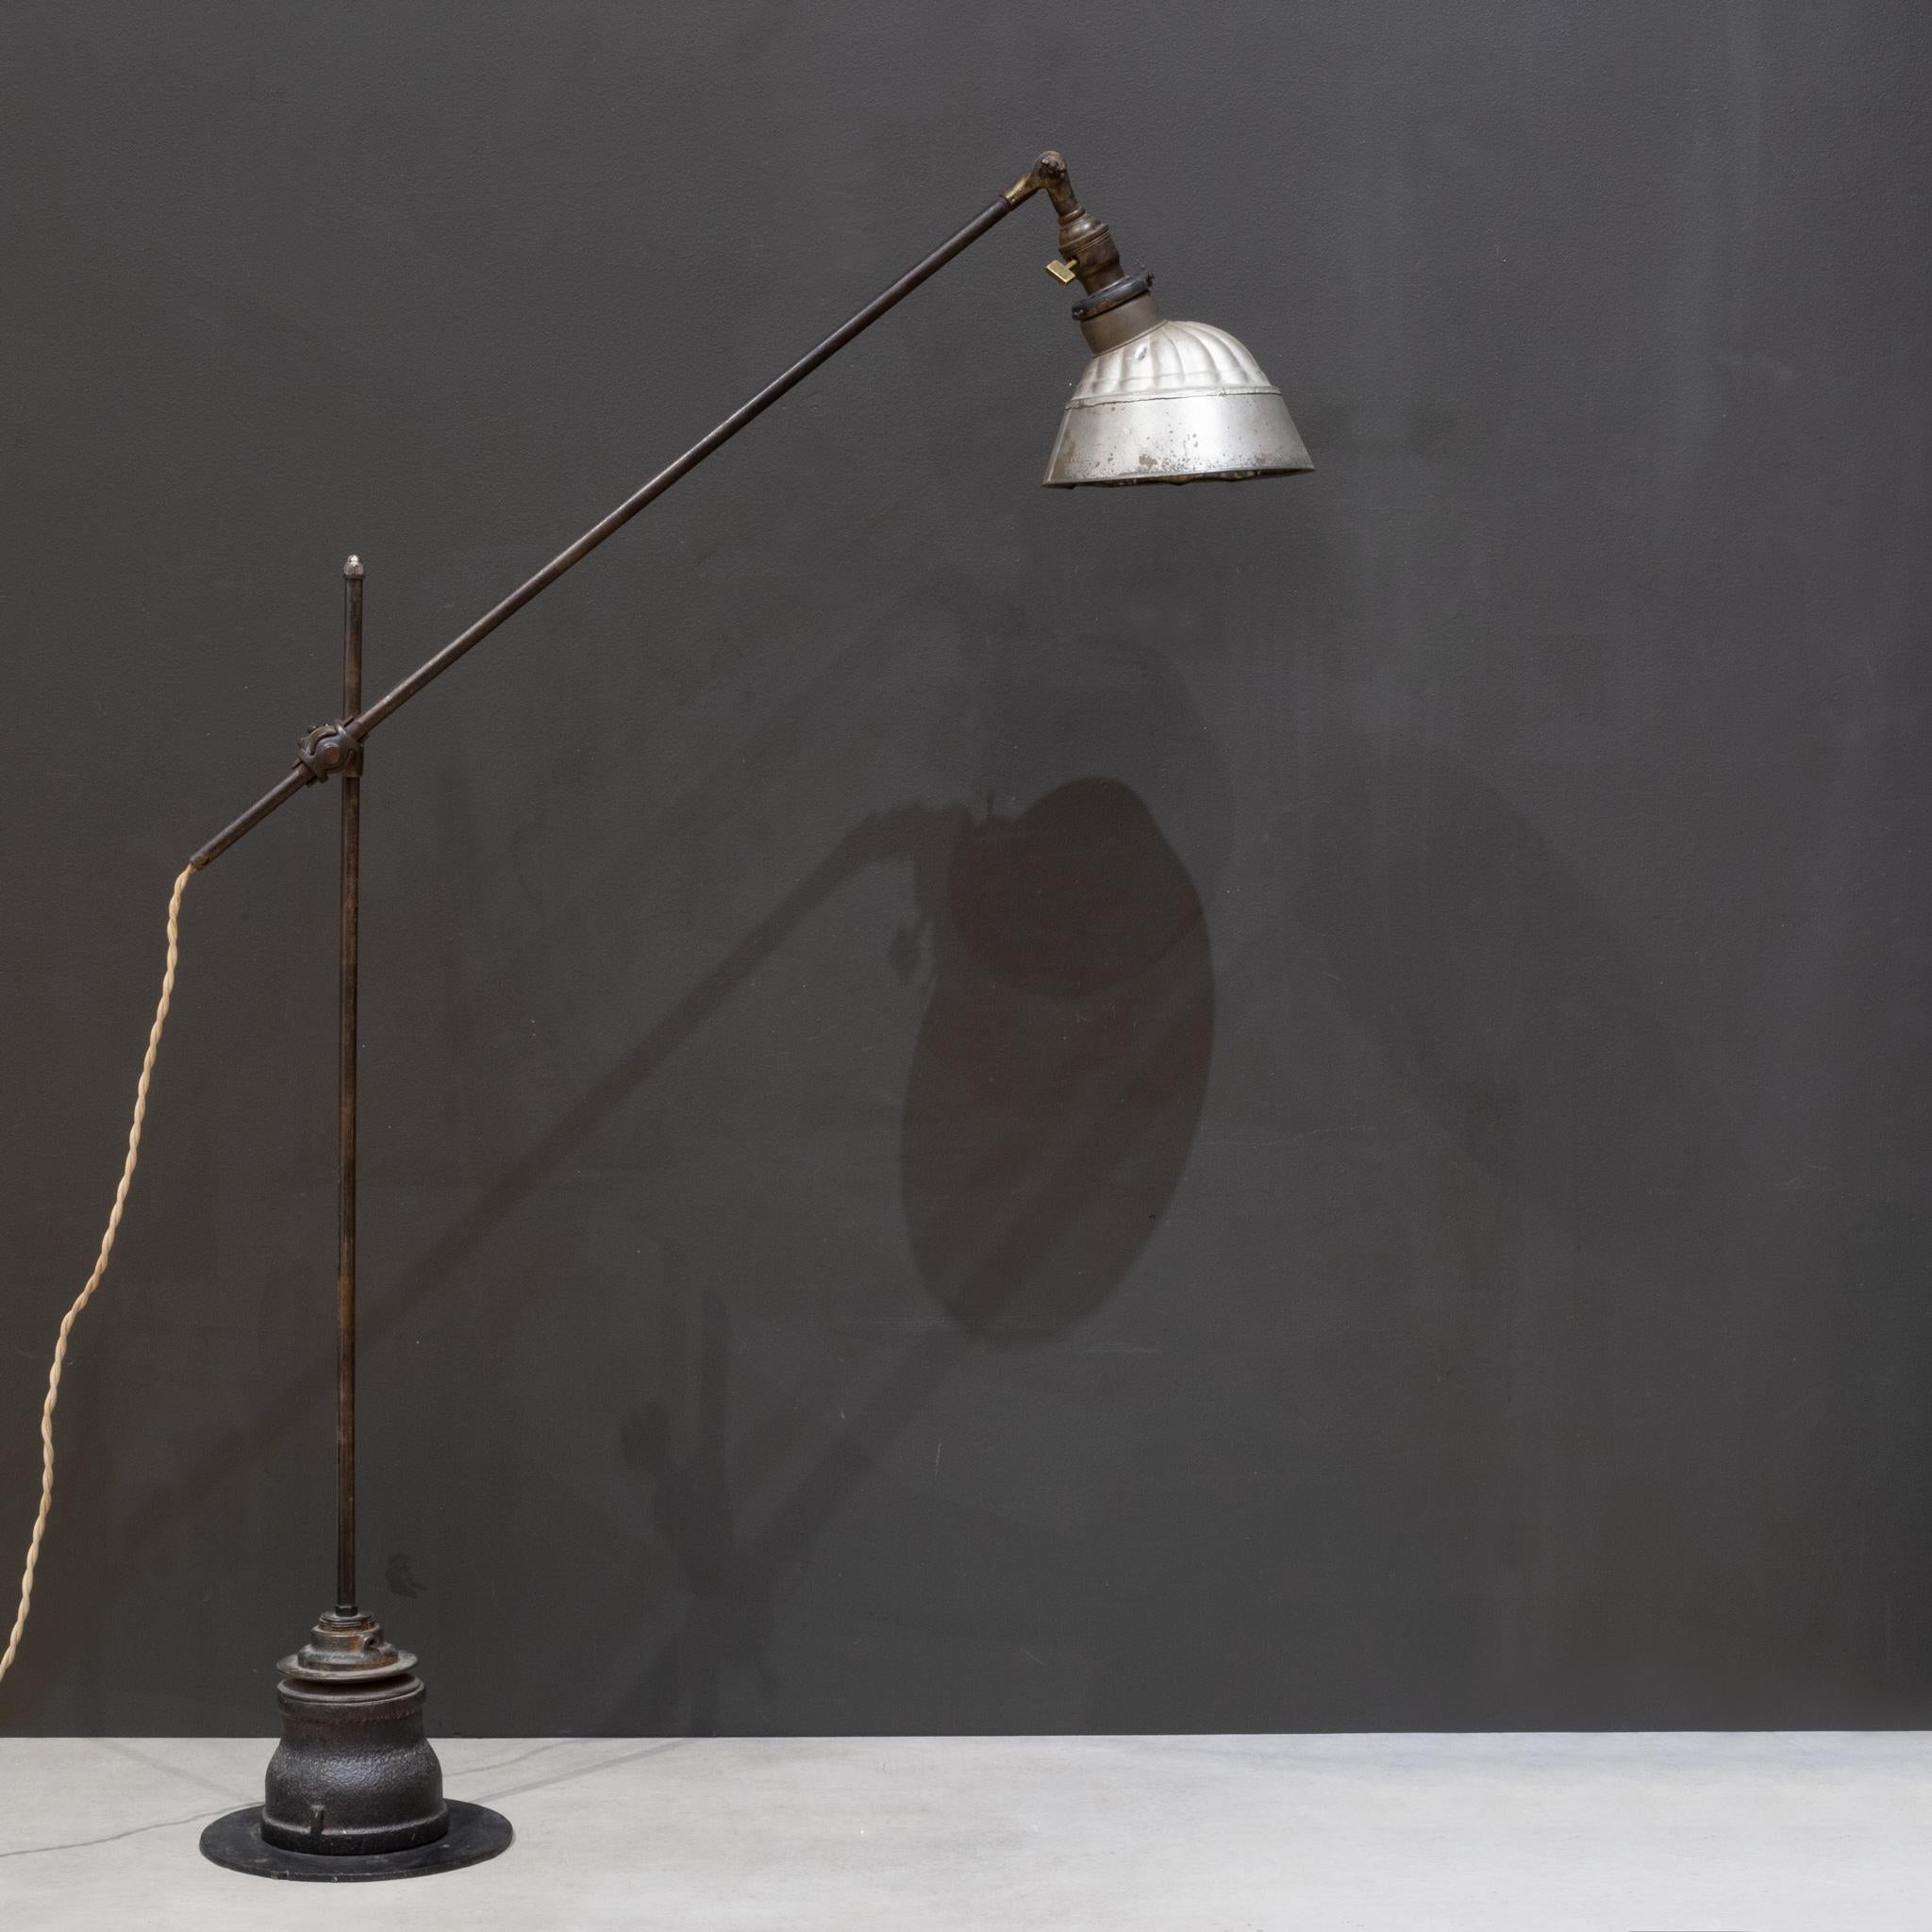 19th Century Early 20th c. Industrial Table or Floor Lamp c.1920-1940